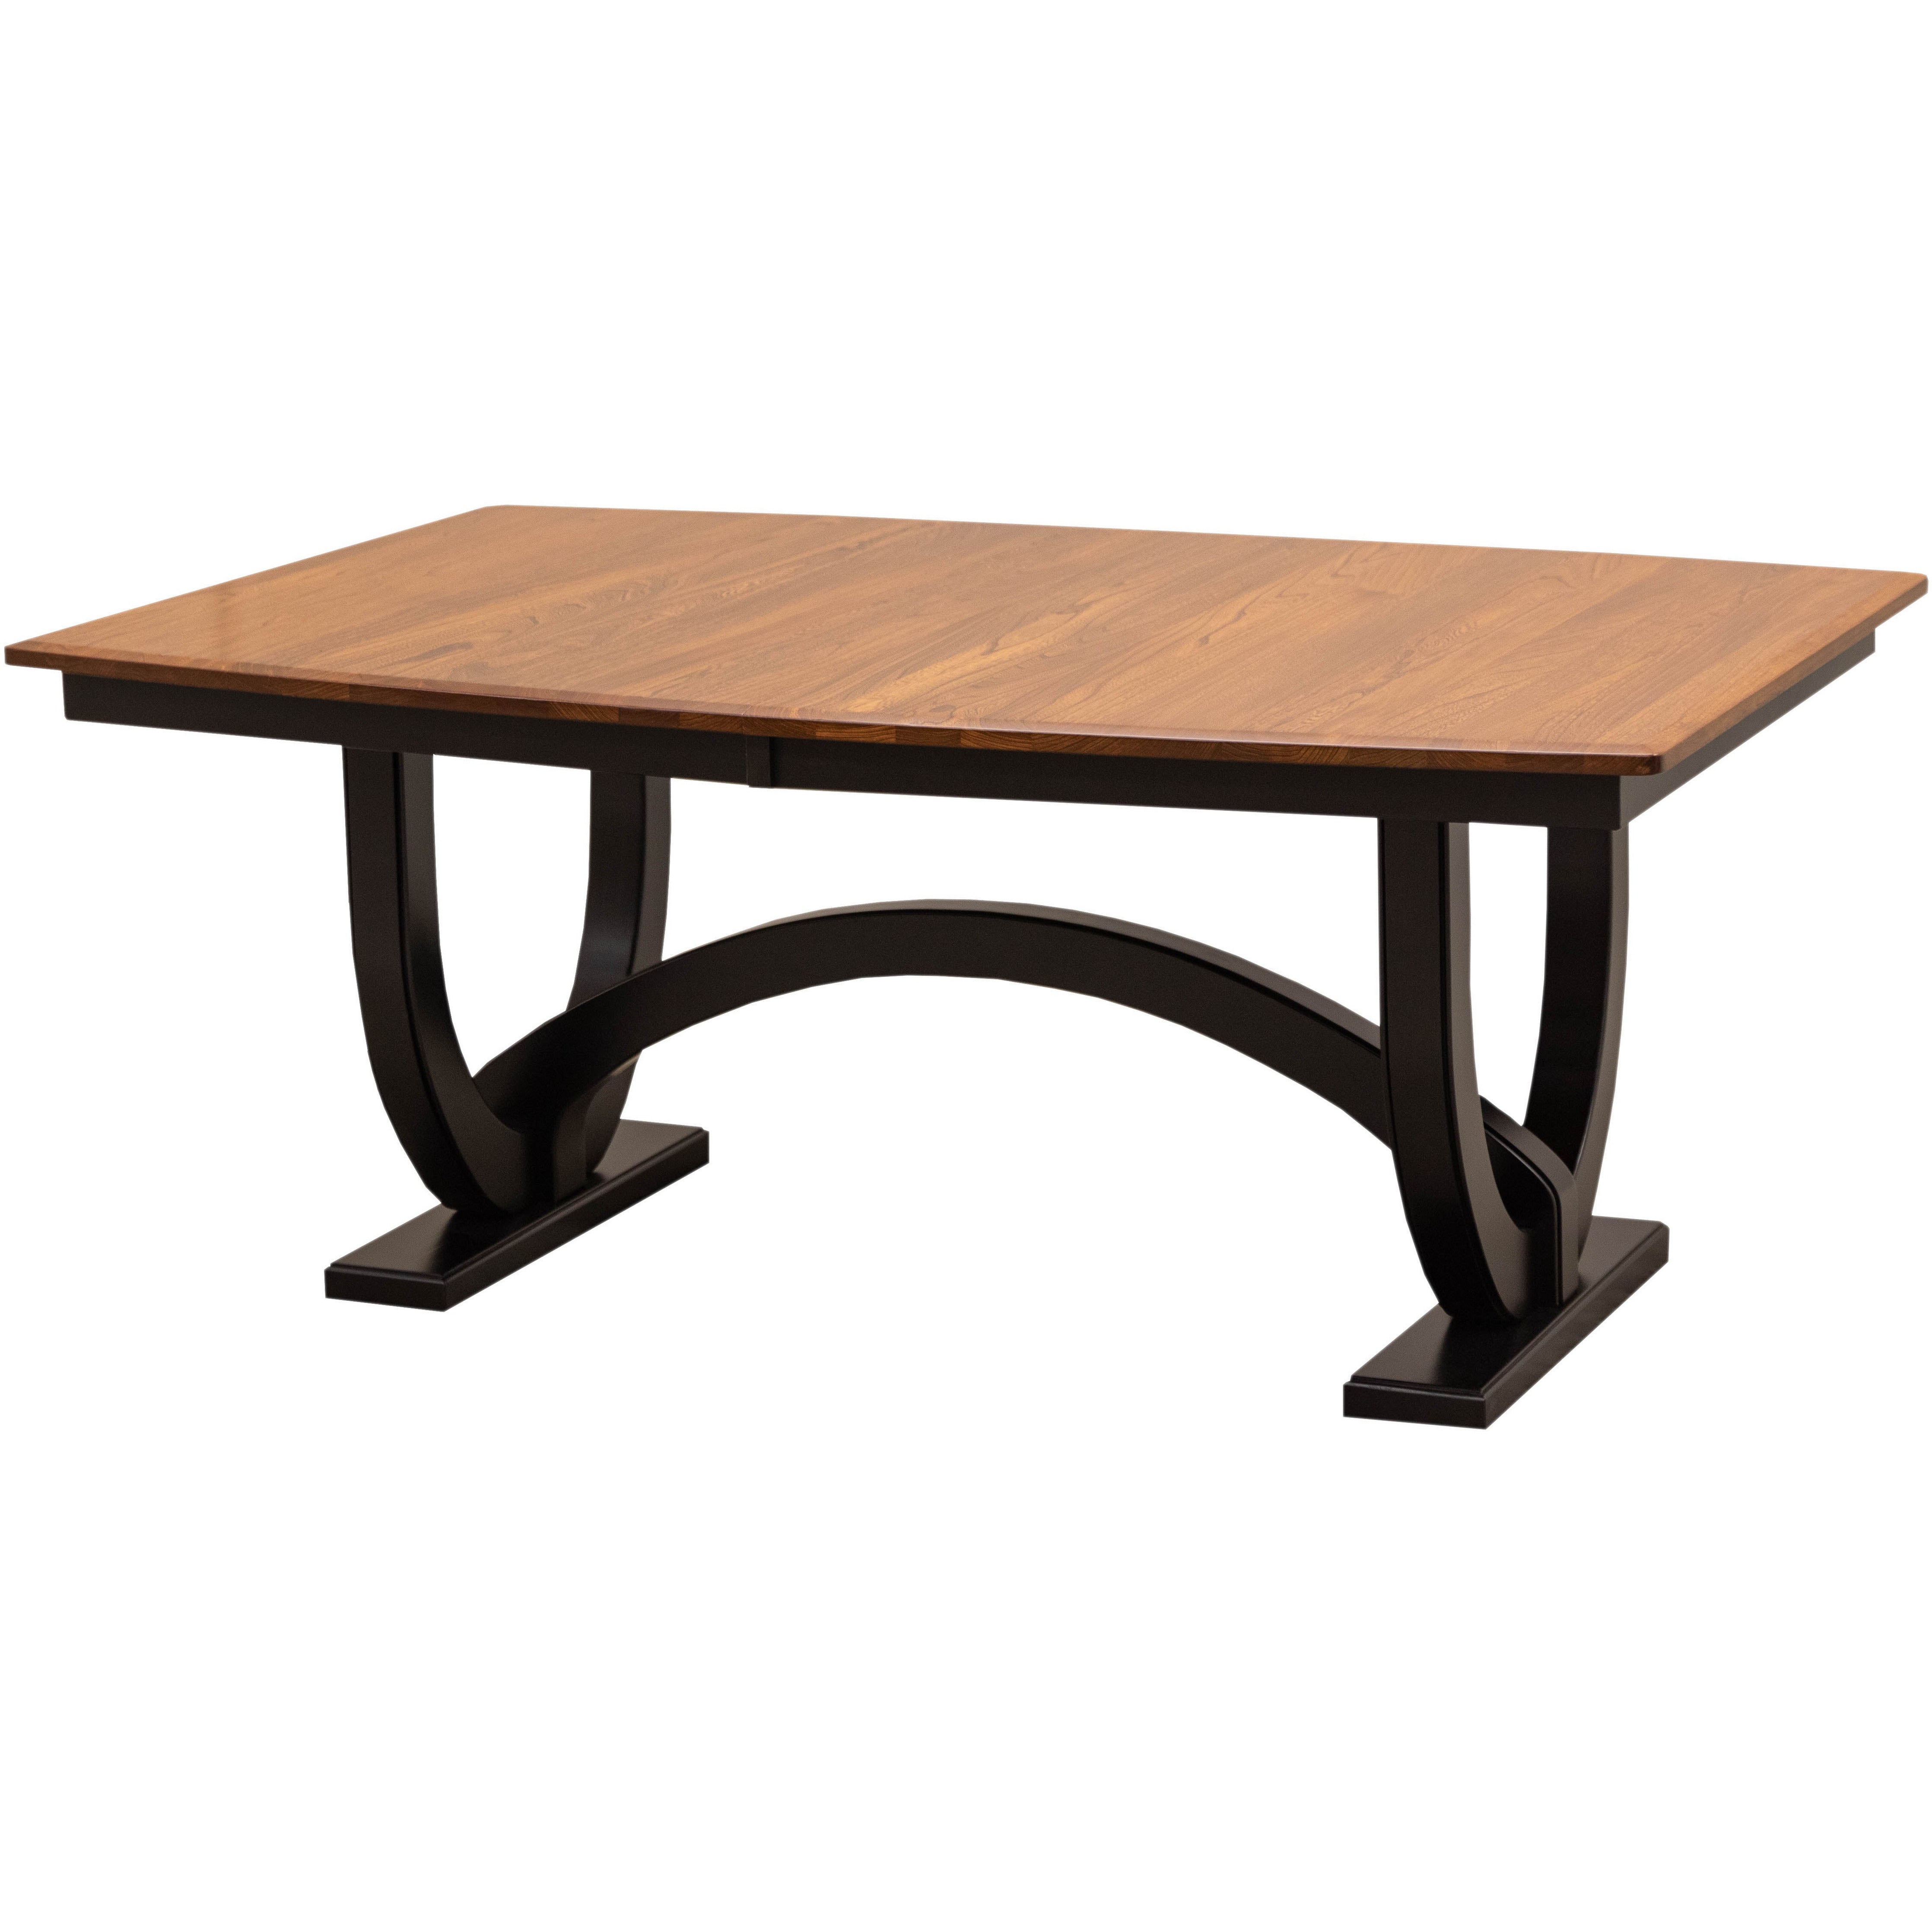 Biltmore Extending Dining Table